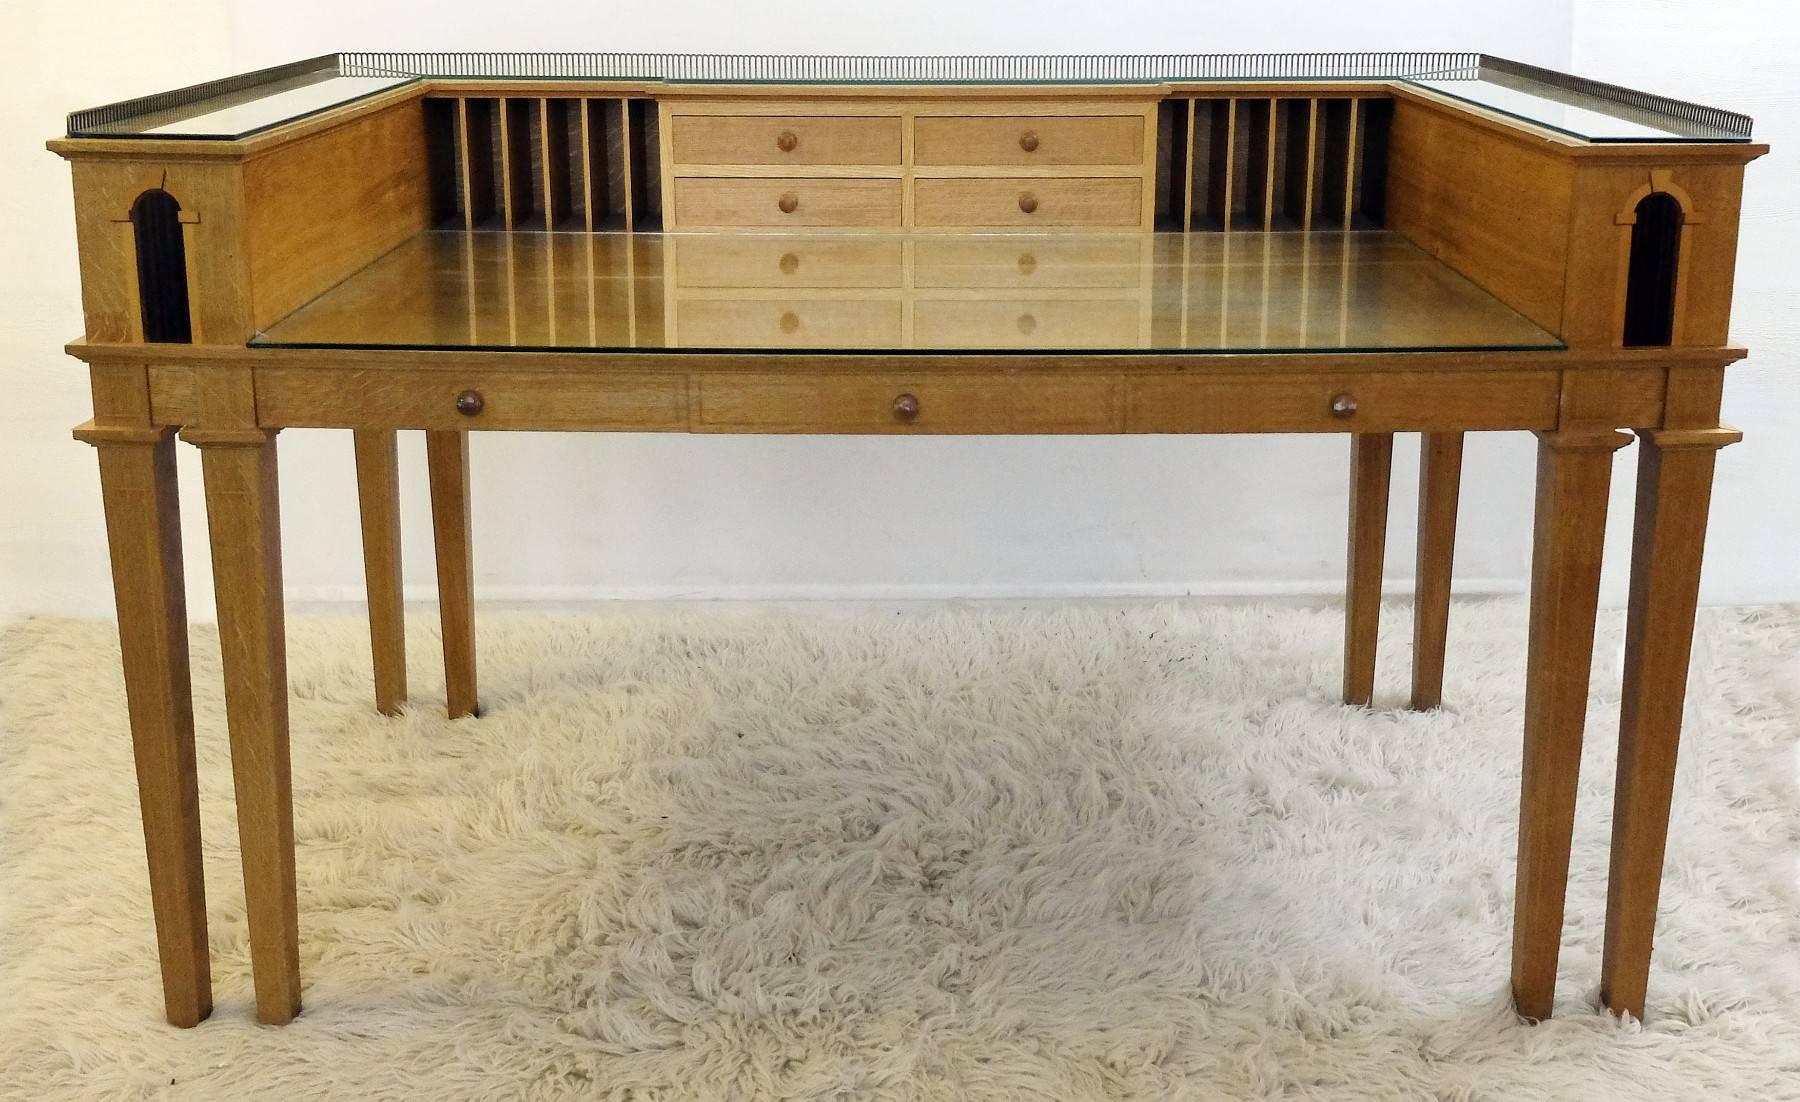 Writing desk designed by David Linley in 1991.